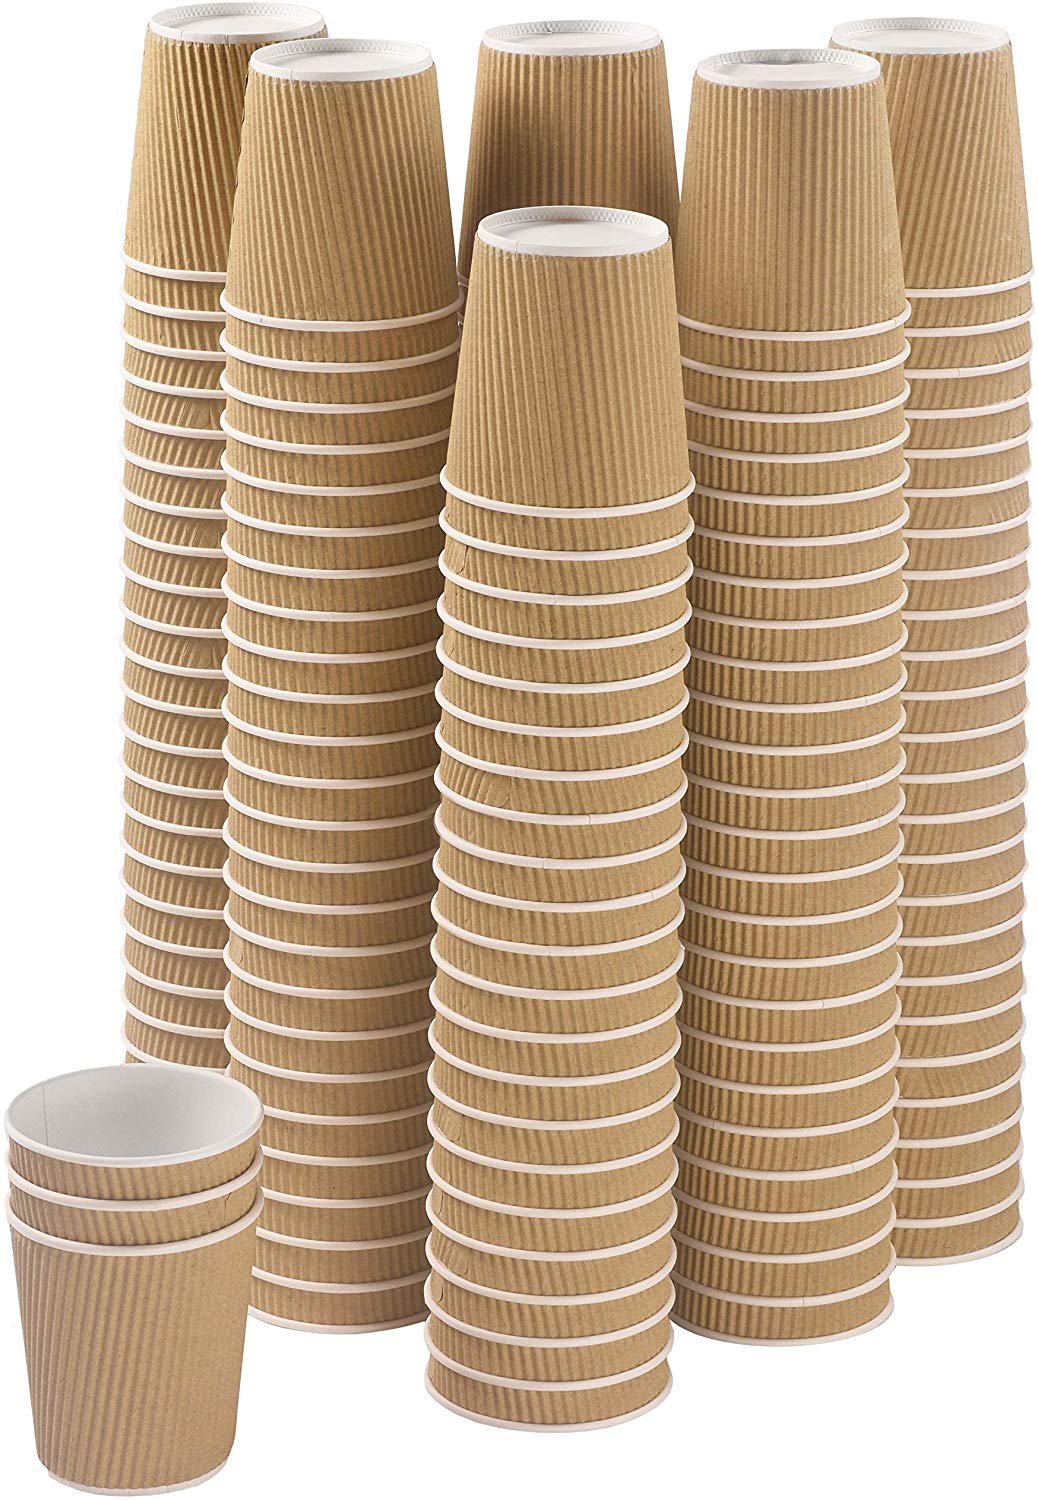 Set of 150 Ripple Insulated Kraft 6-oz Paper Cups – Coffee/Tea Hot Cups | Recyclable |3-Layer Rippled Wall For Better Insulation | Perfect for Cappuccino, Hot Cocoa, or Iced Drinks - Singleware 